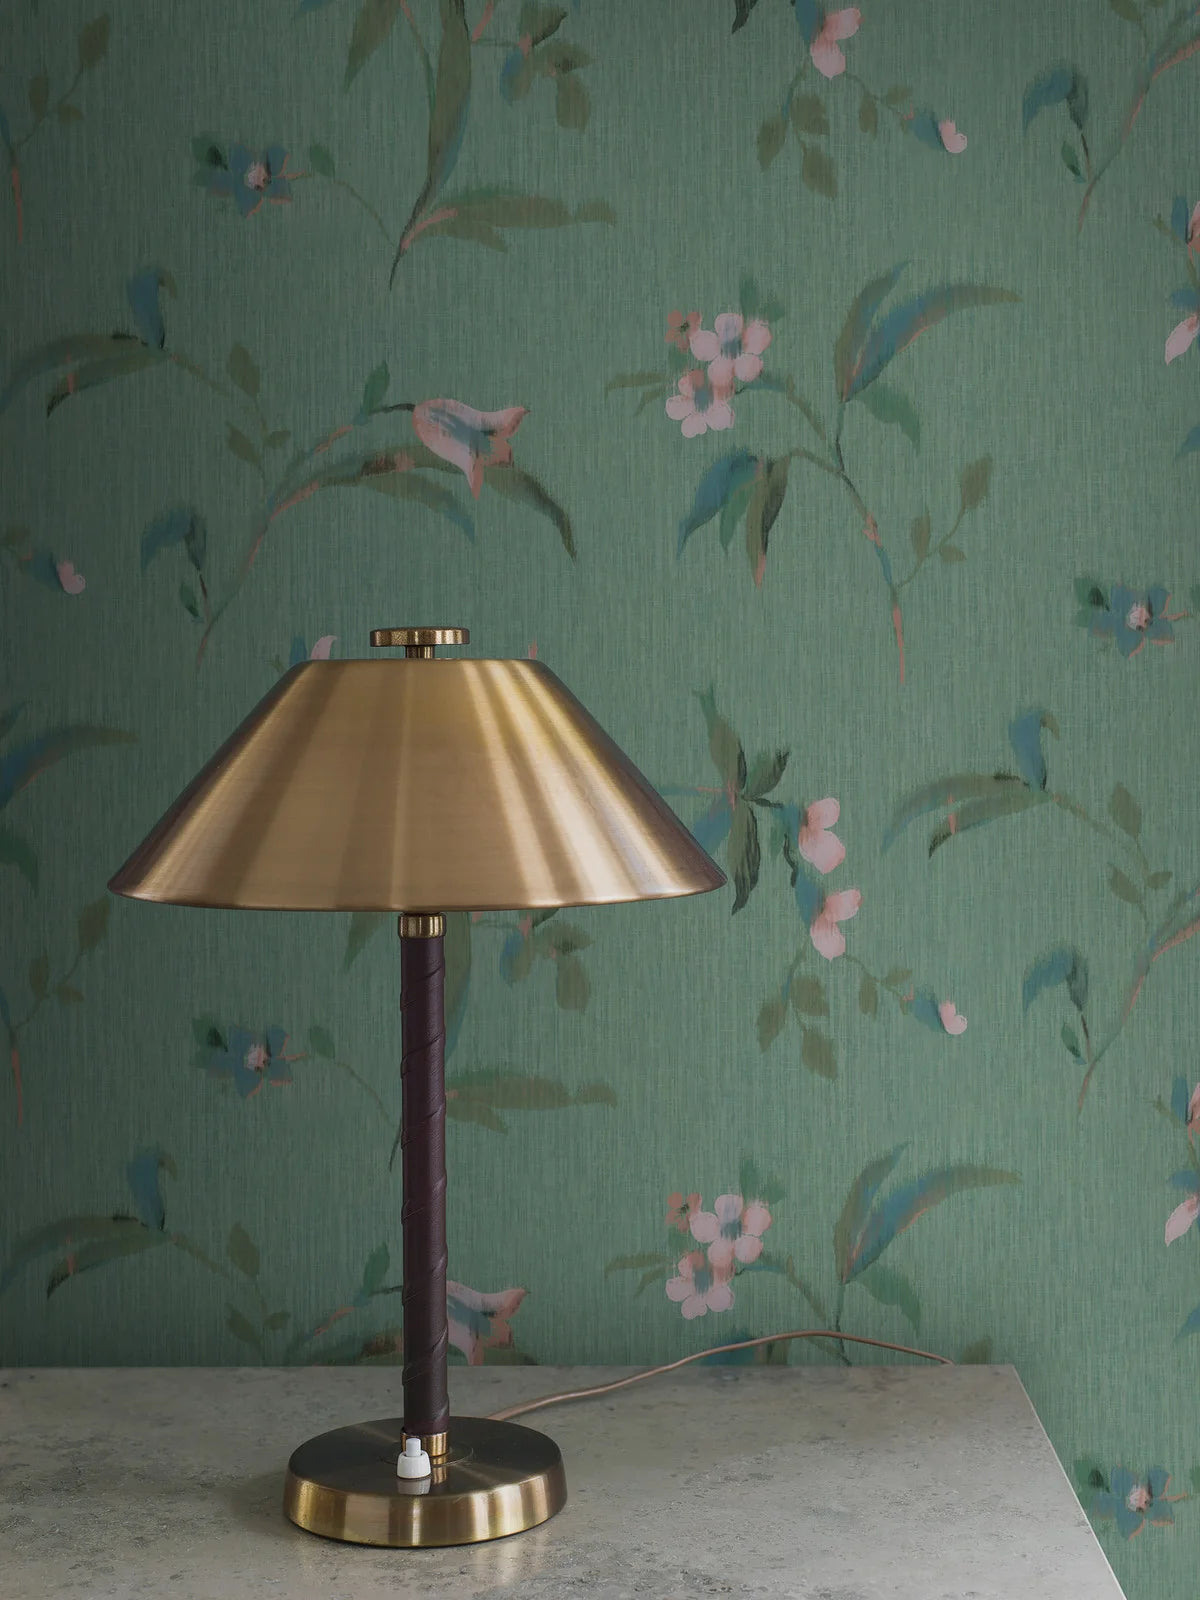 Colored in the original scheme of pink, blue and green turquoise, our Marlene wallpaper takes you to a world of vintage charm and Swedish Grace.